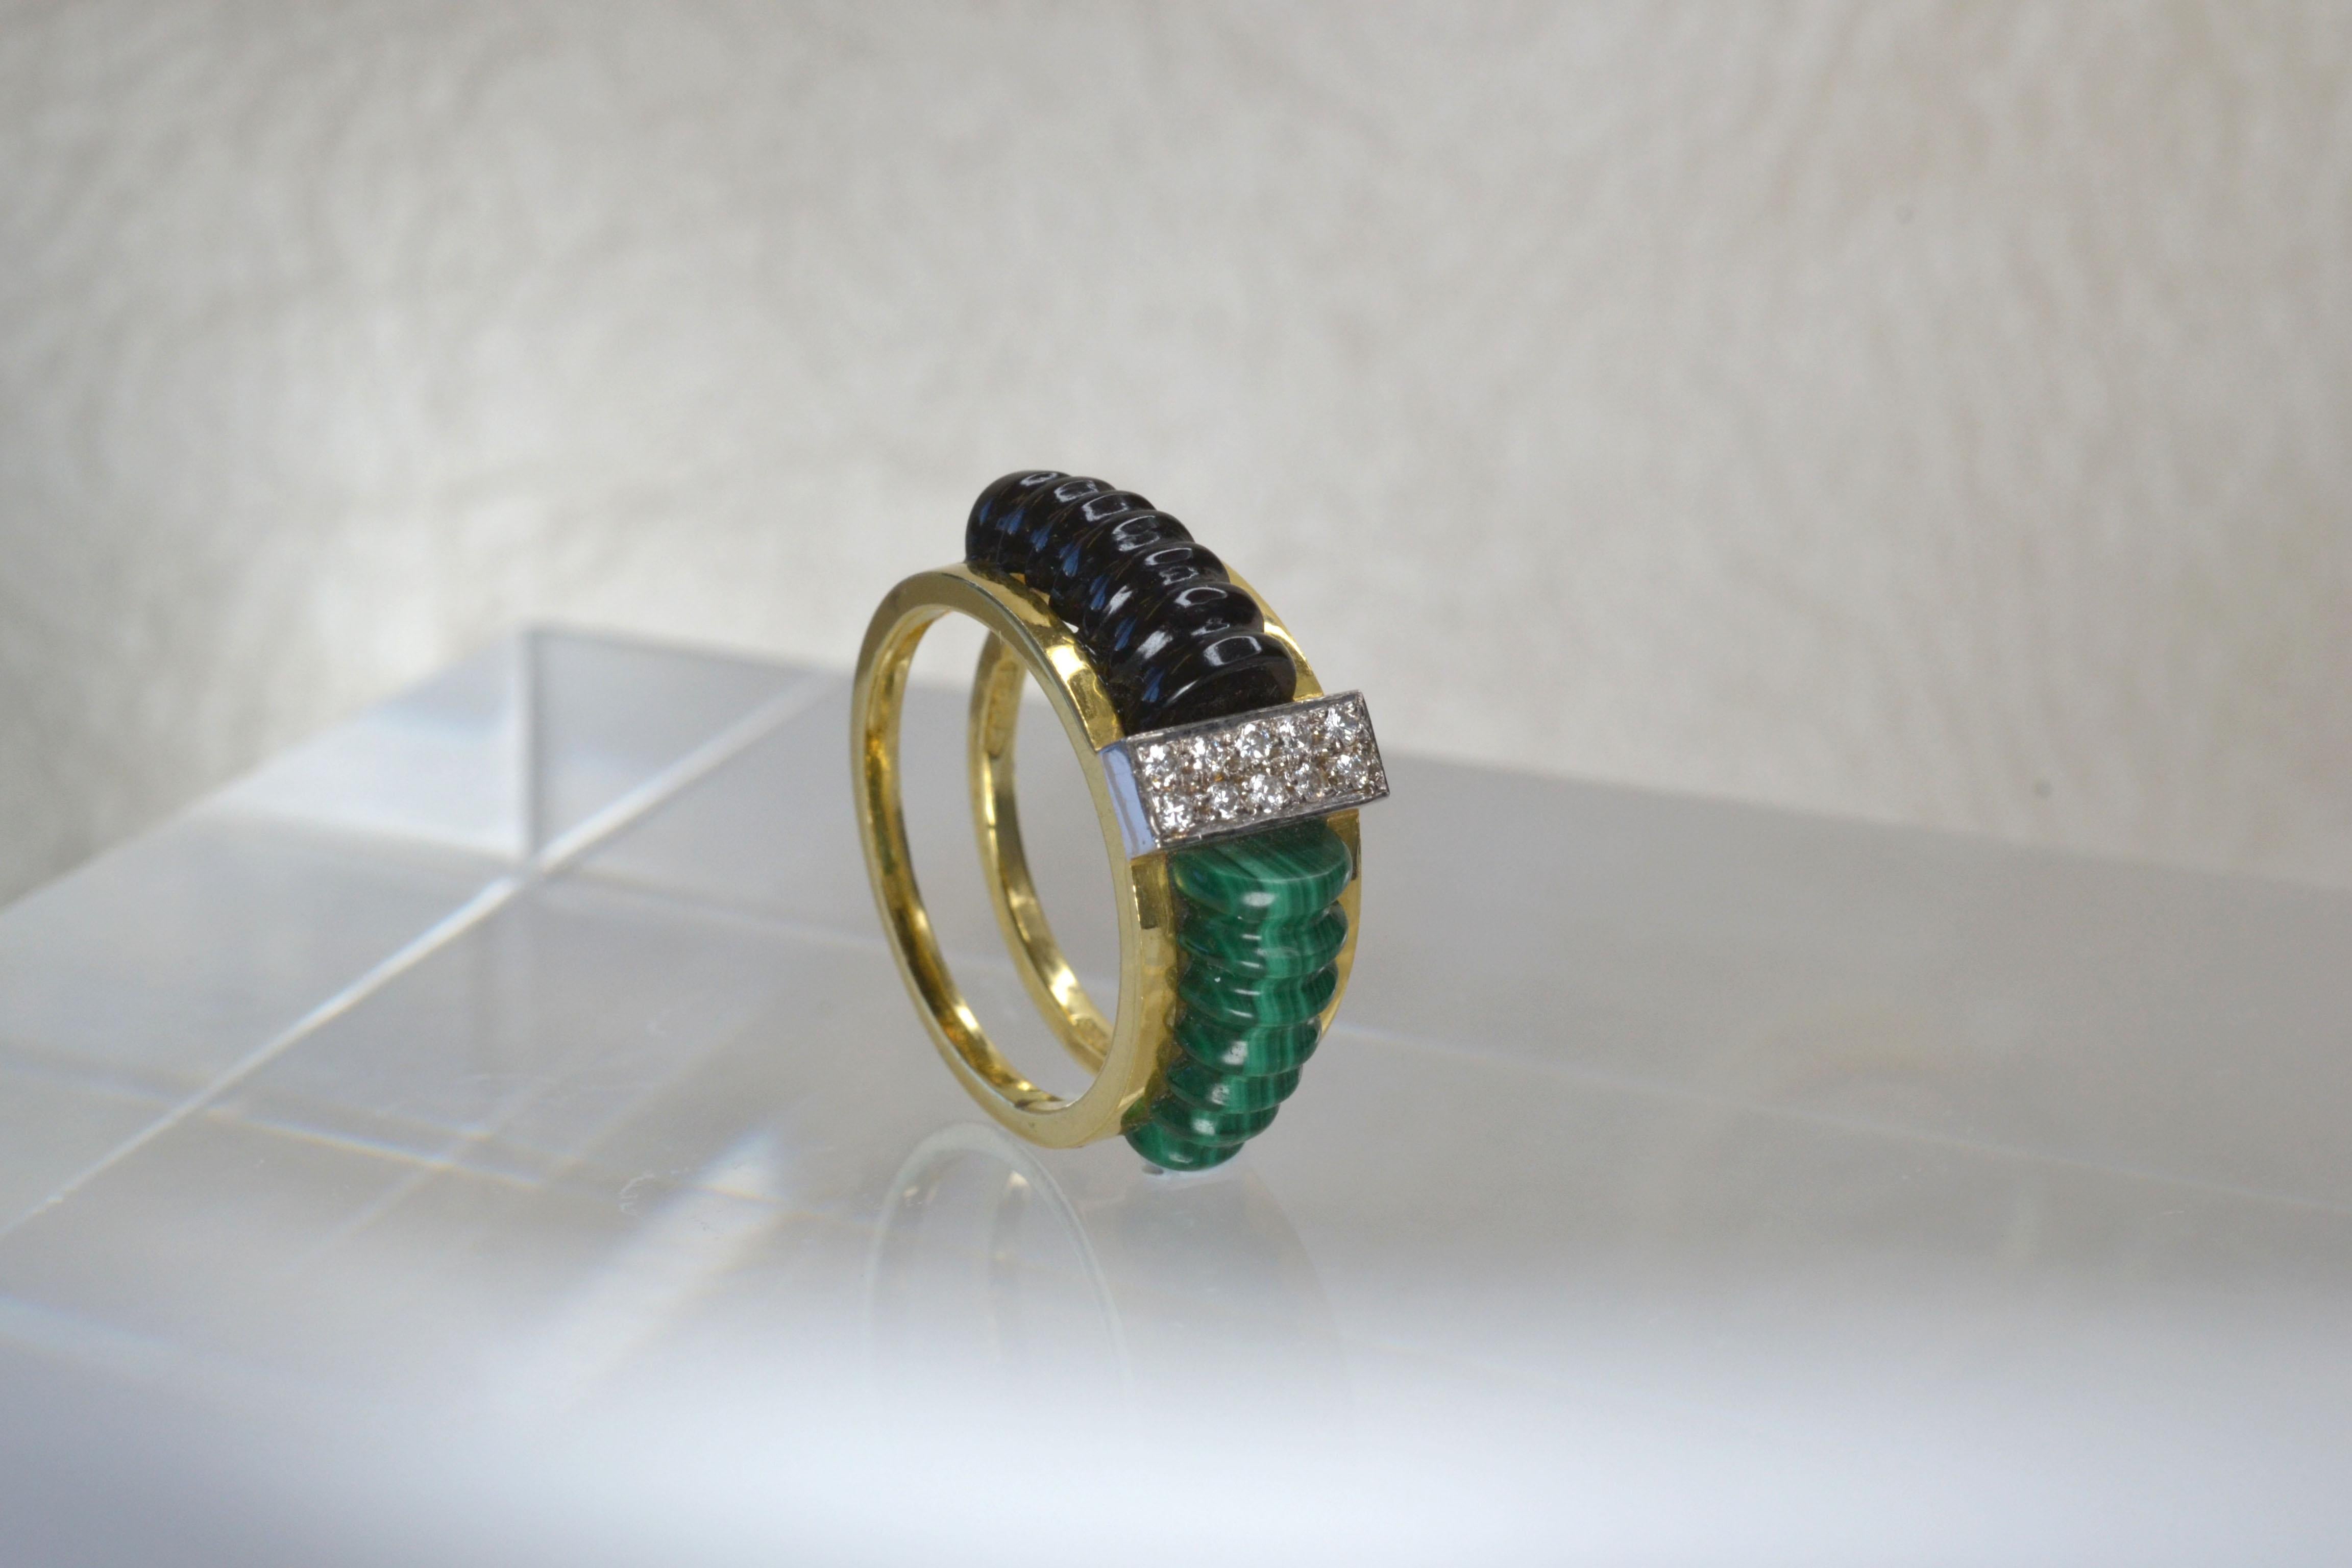 Vintage 18k Gold Malachite and Onyx Ring with Diamonds, One-of-a-kind In Good Condition For Sale In London, GB